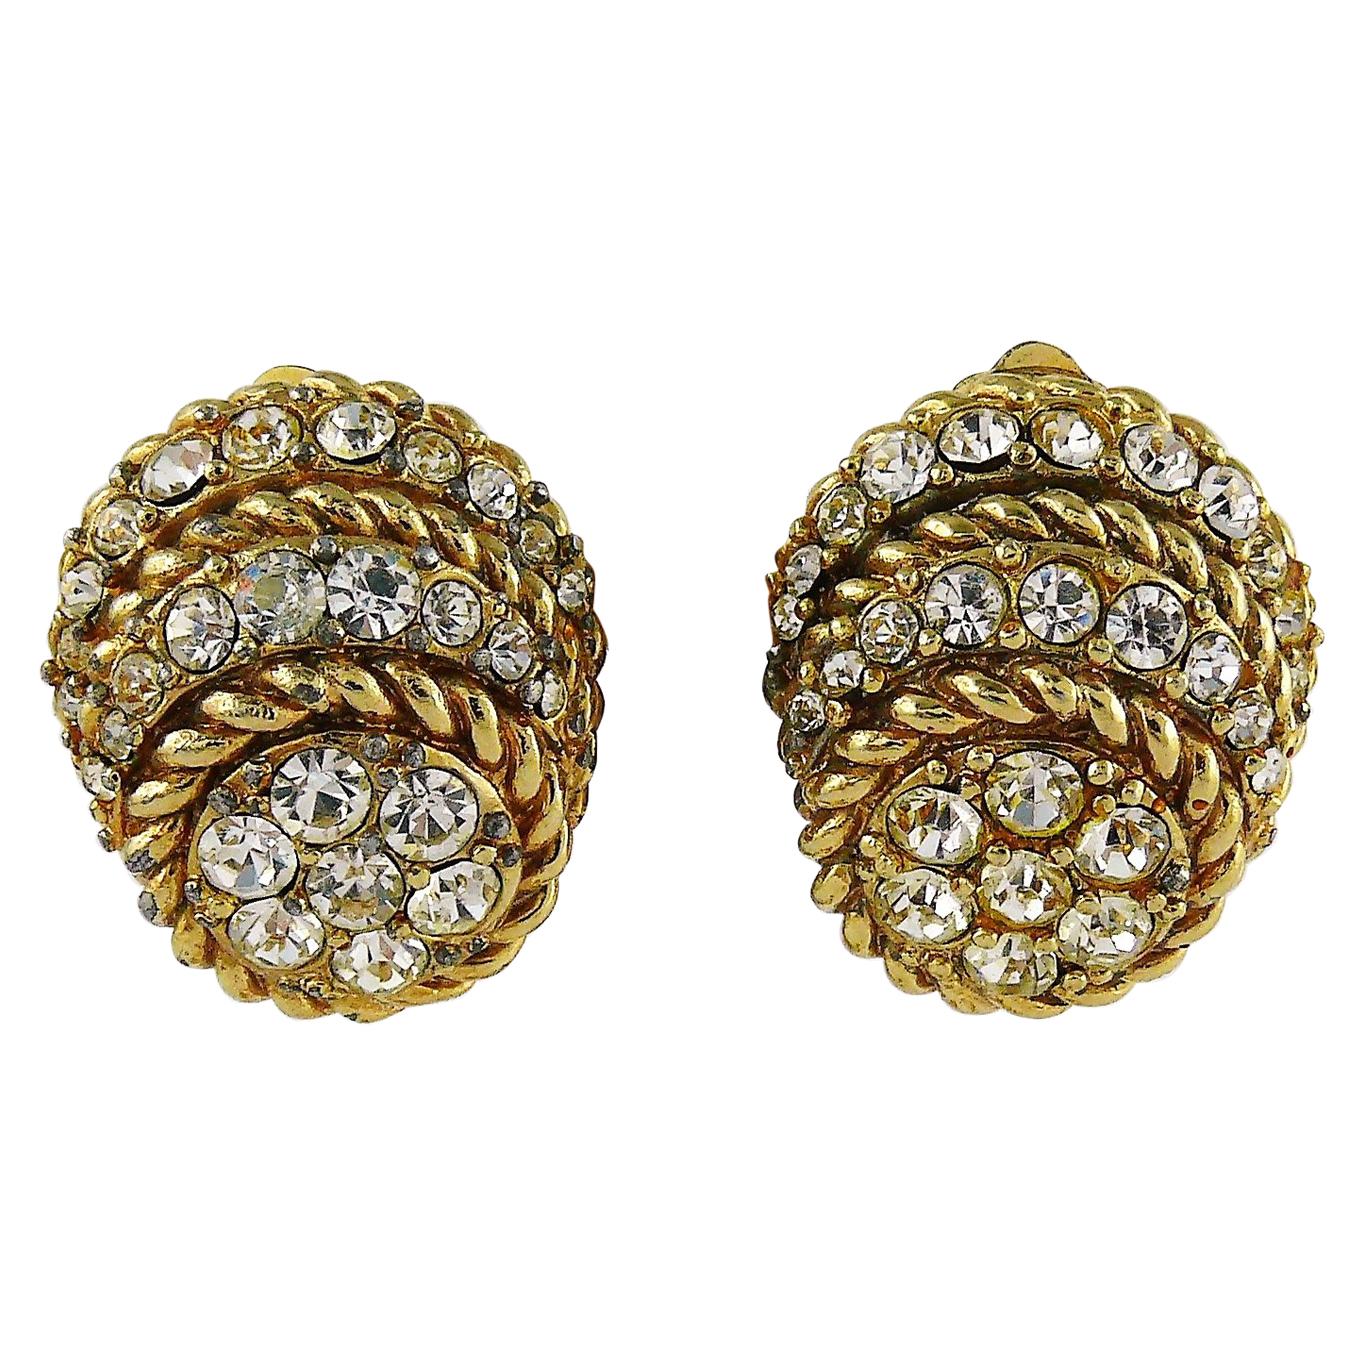 Christian Dior Vintage 1968 Domed Clip-On Earrings